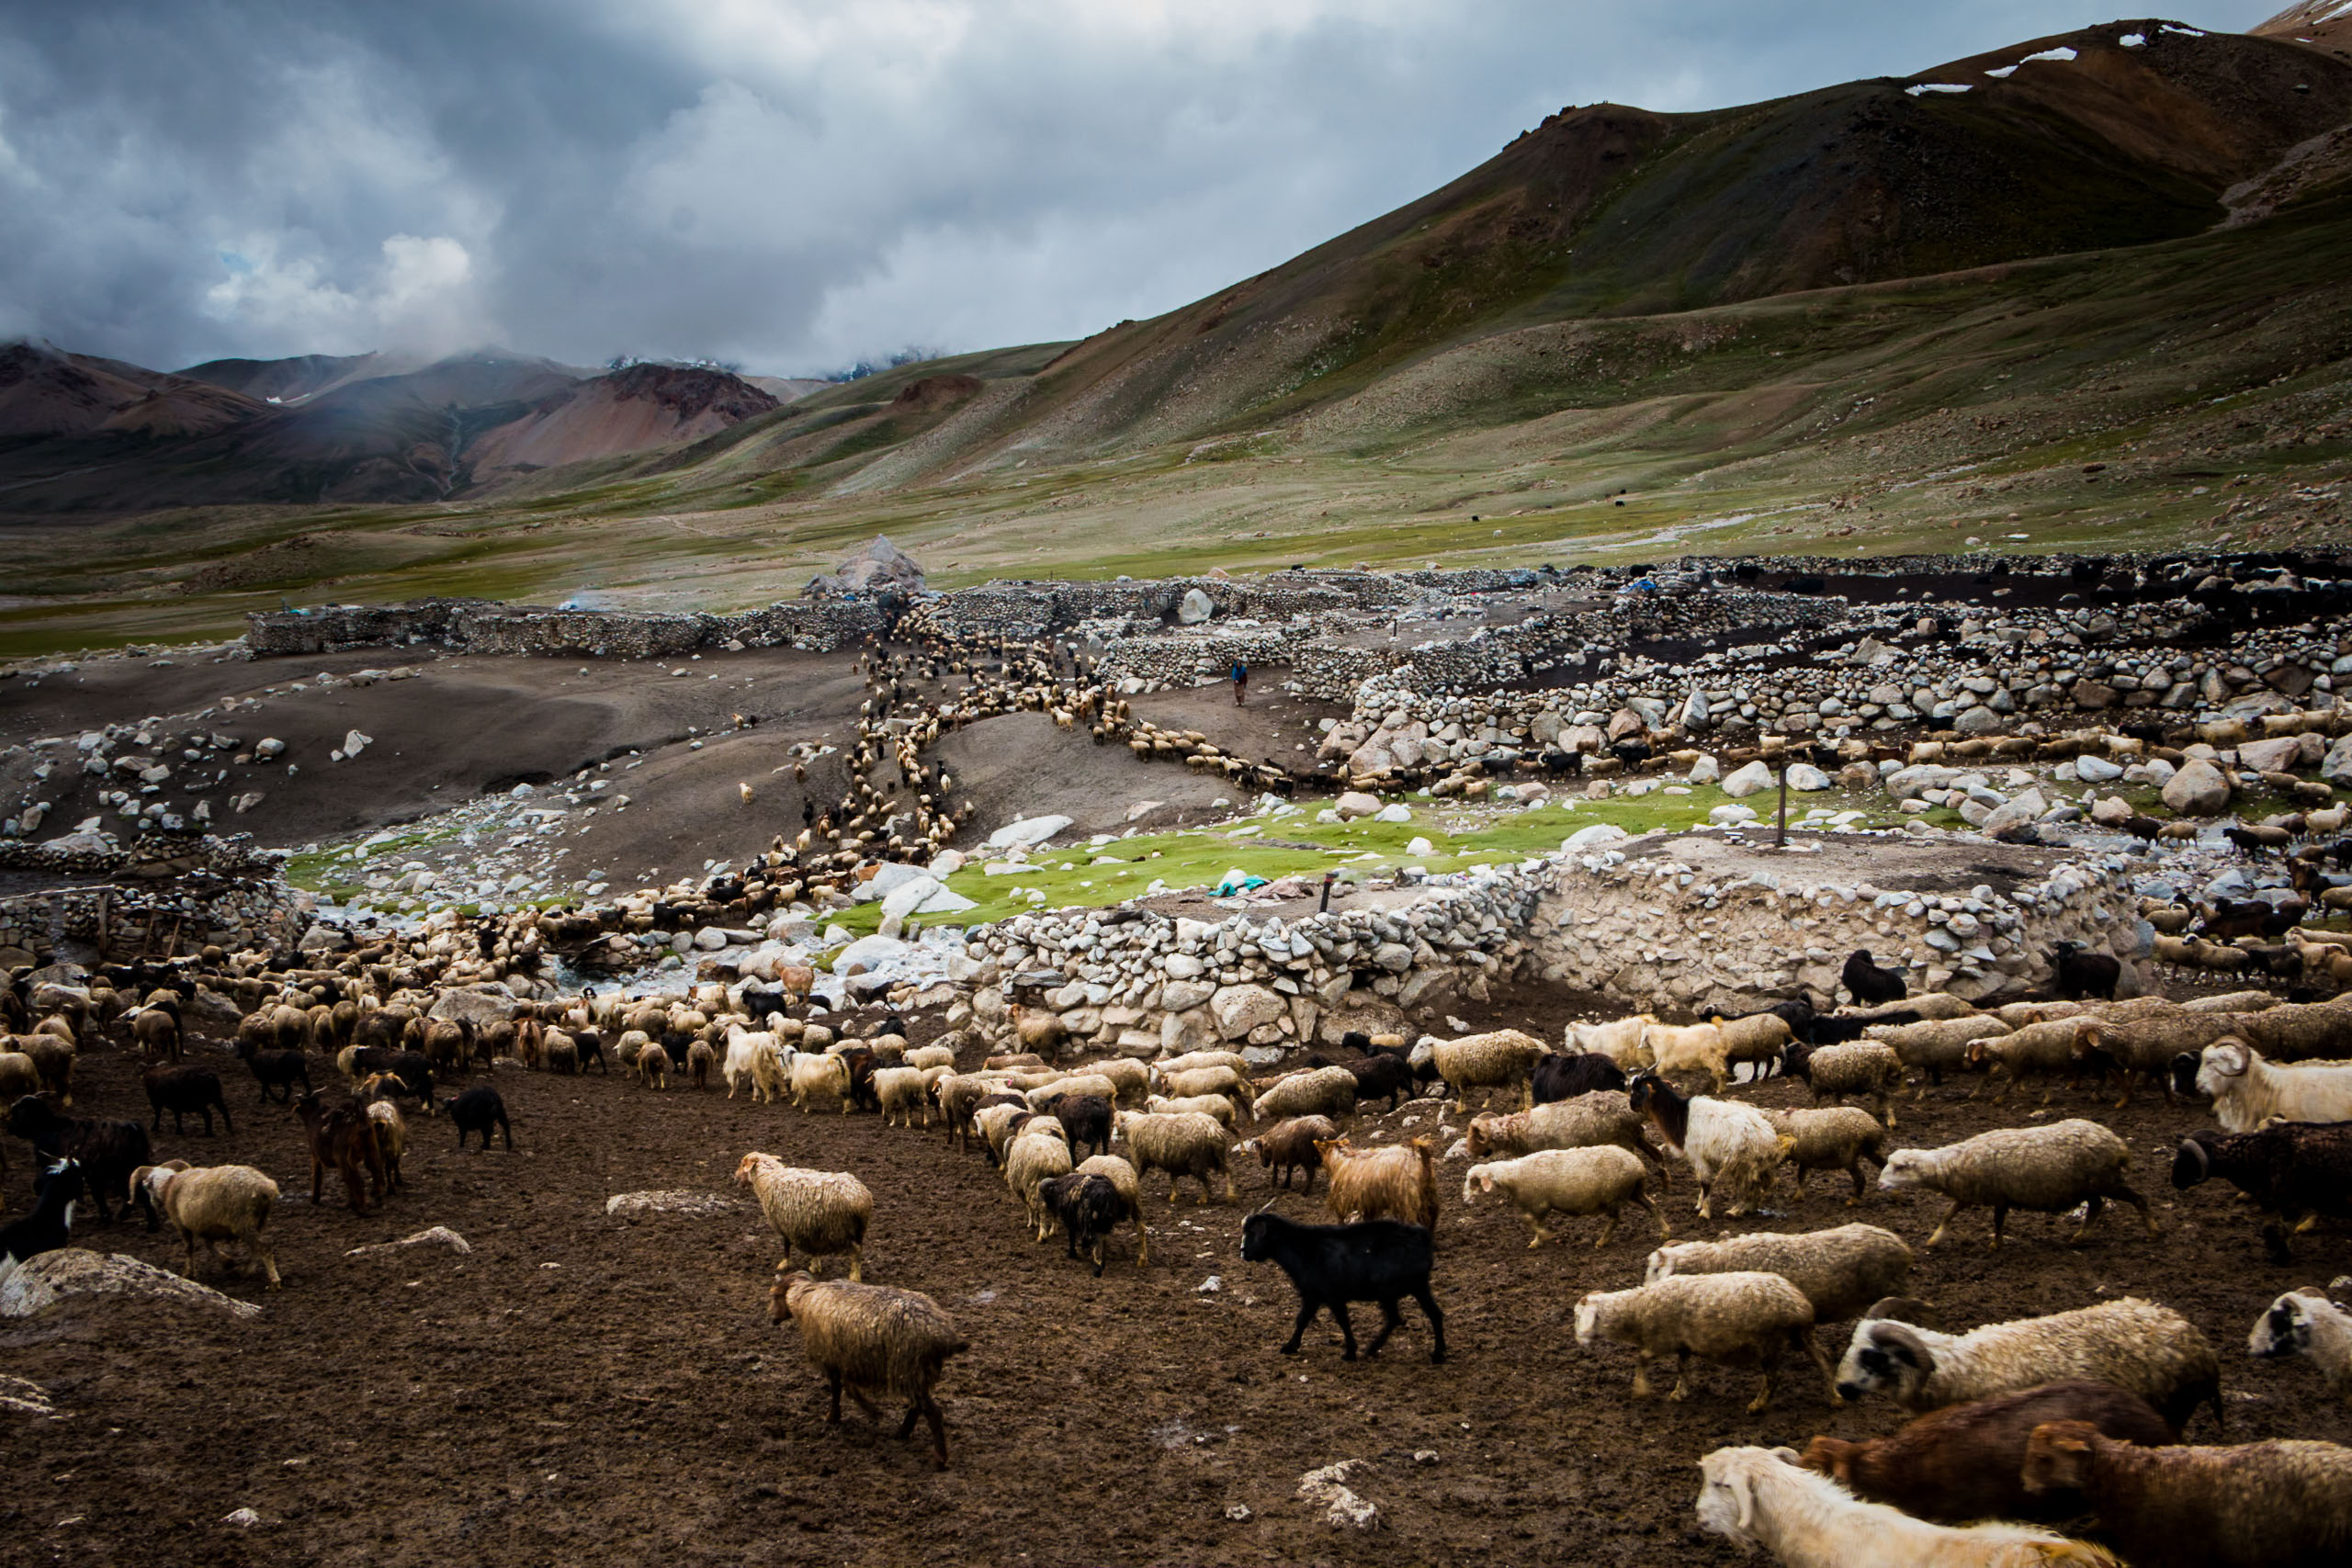 In harsh and inclement weather conditions, subject to the whims of the sun, wind and snow, shepherdesses take care of over one thousand cattle; sheep, goats and yaks.